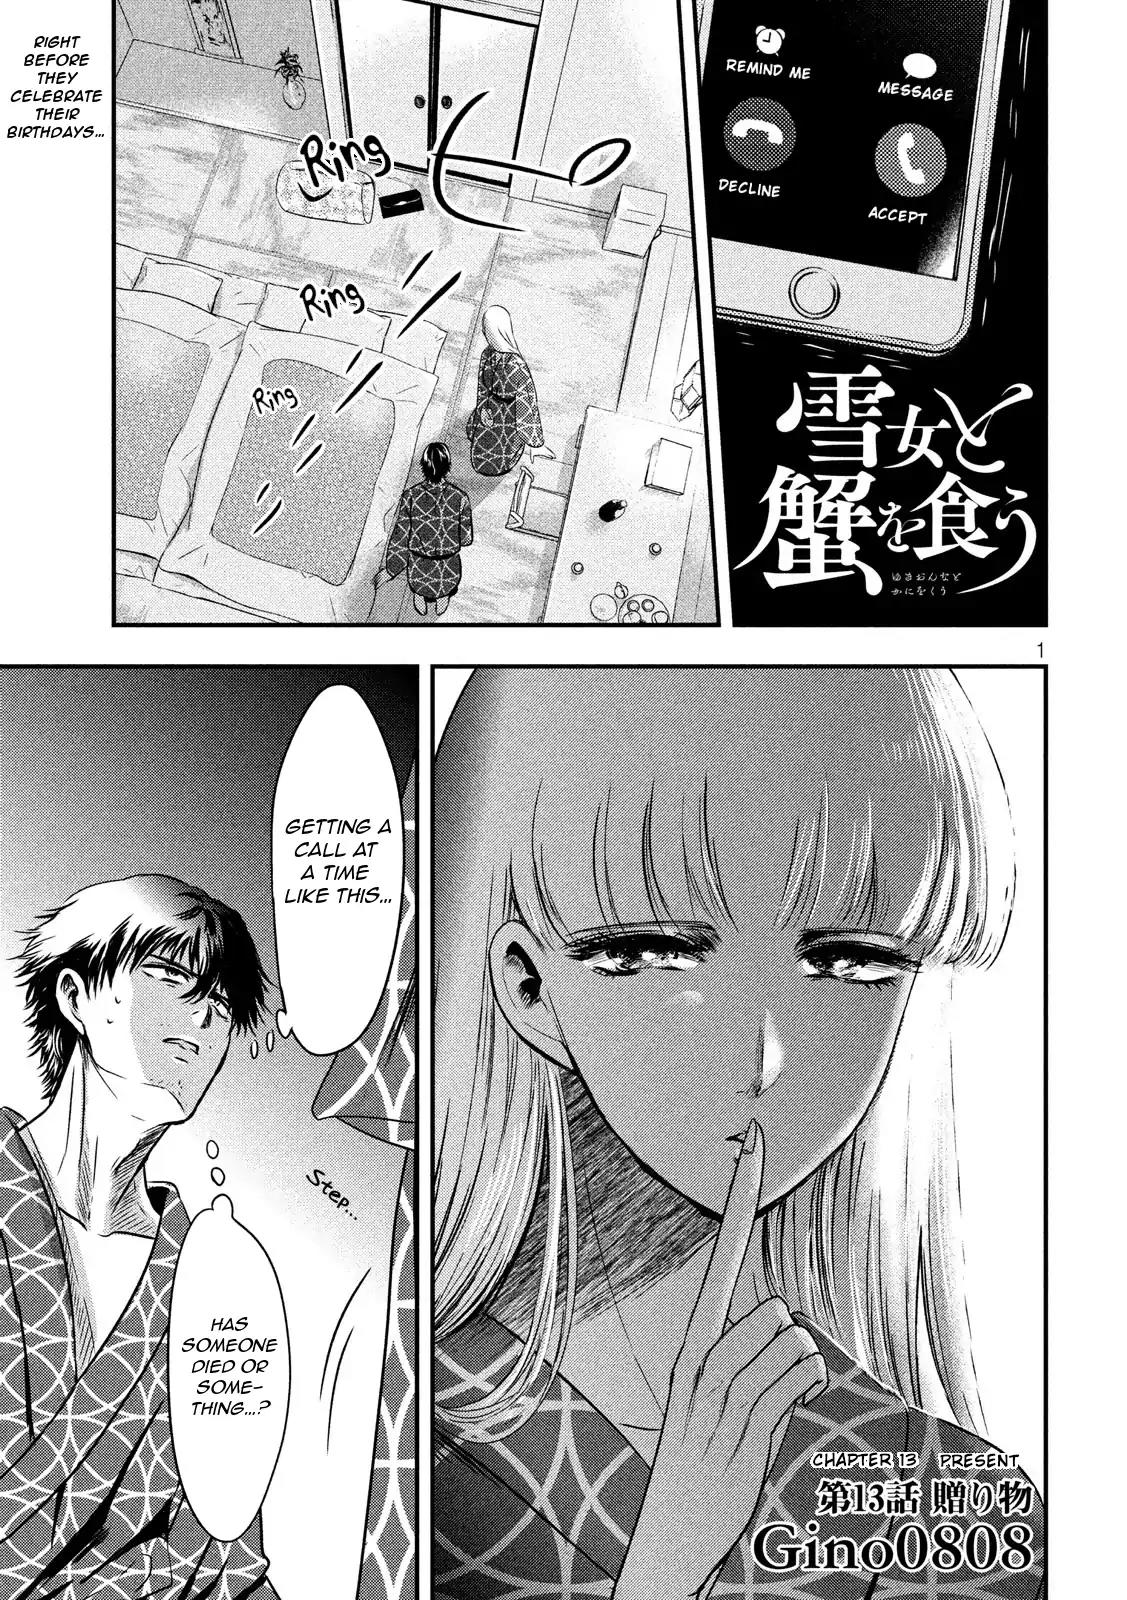 Eating Crab with a Yukionna Chapter 13: